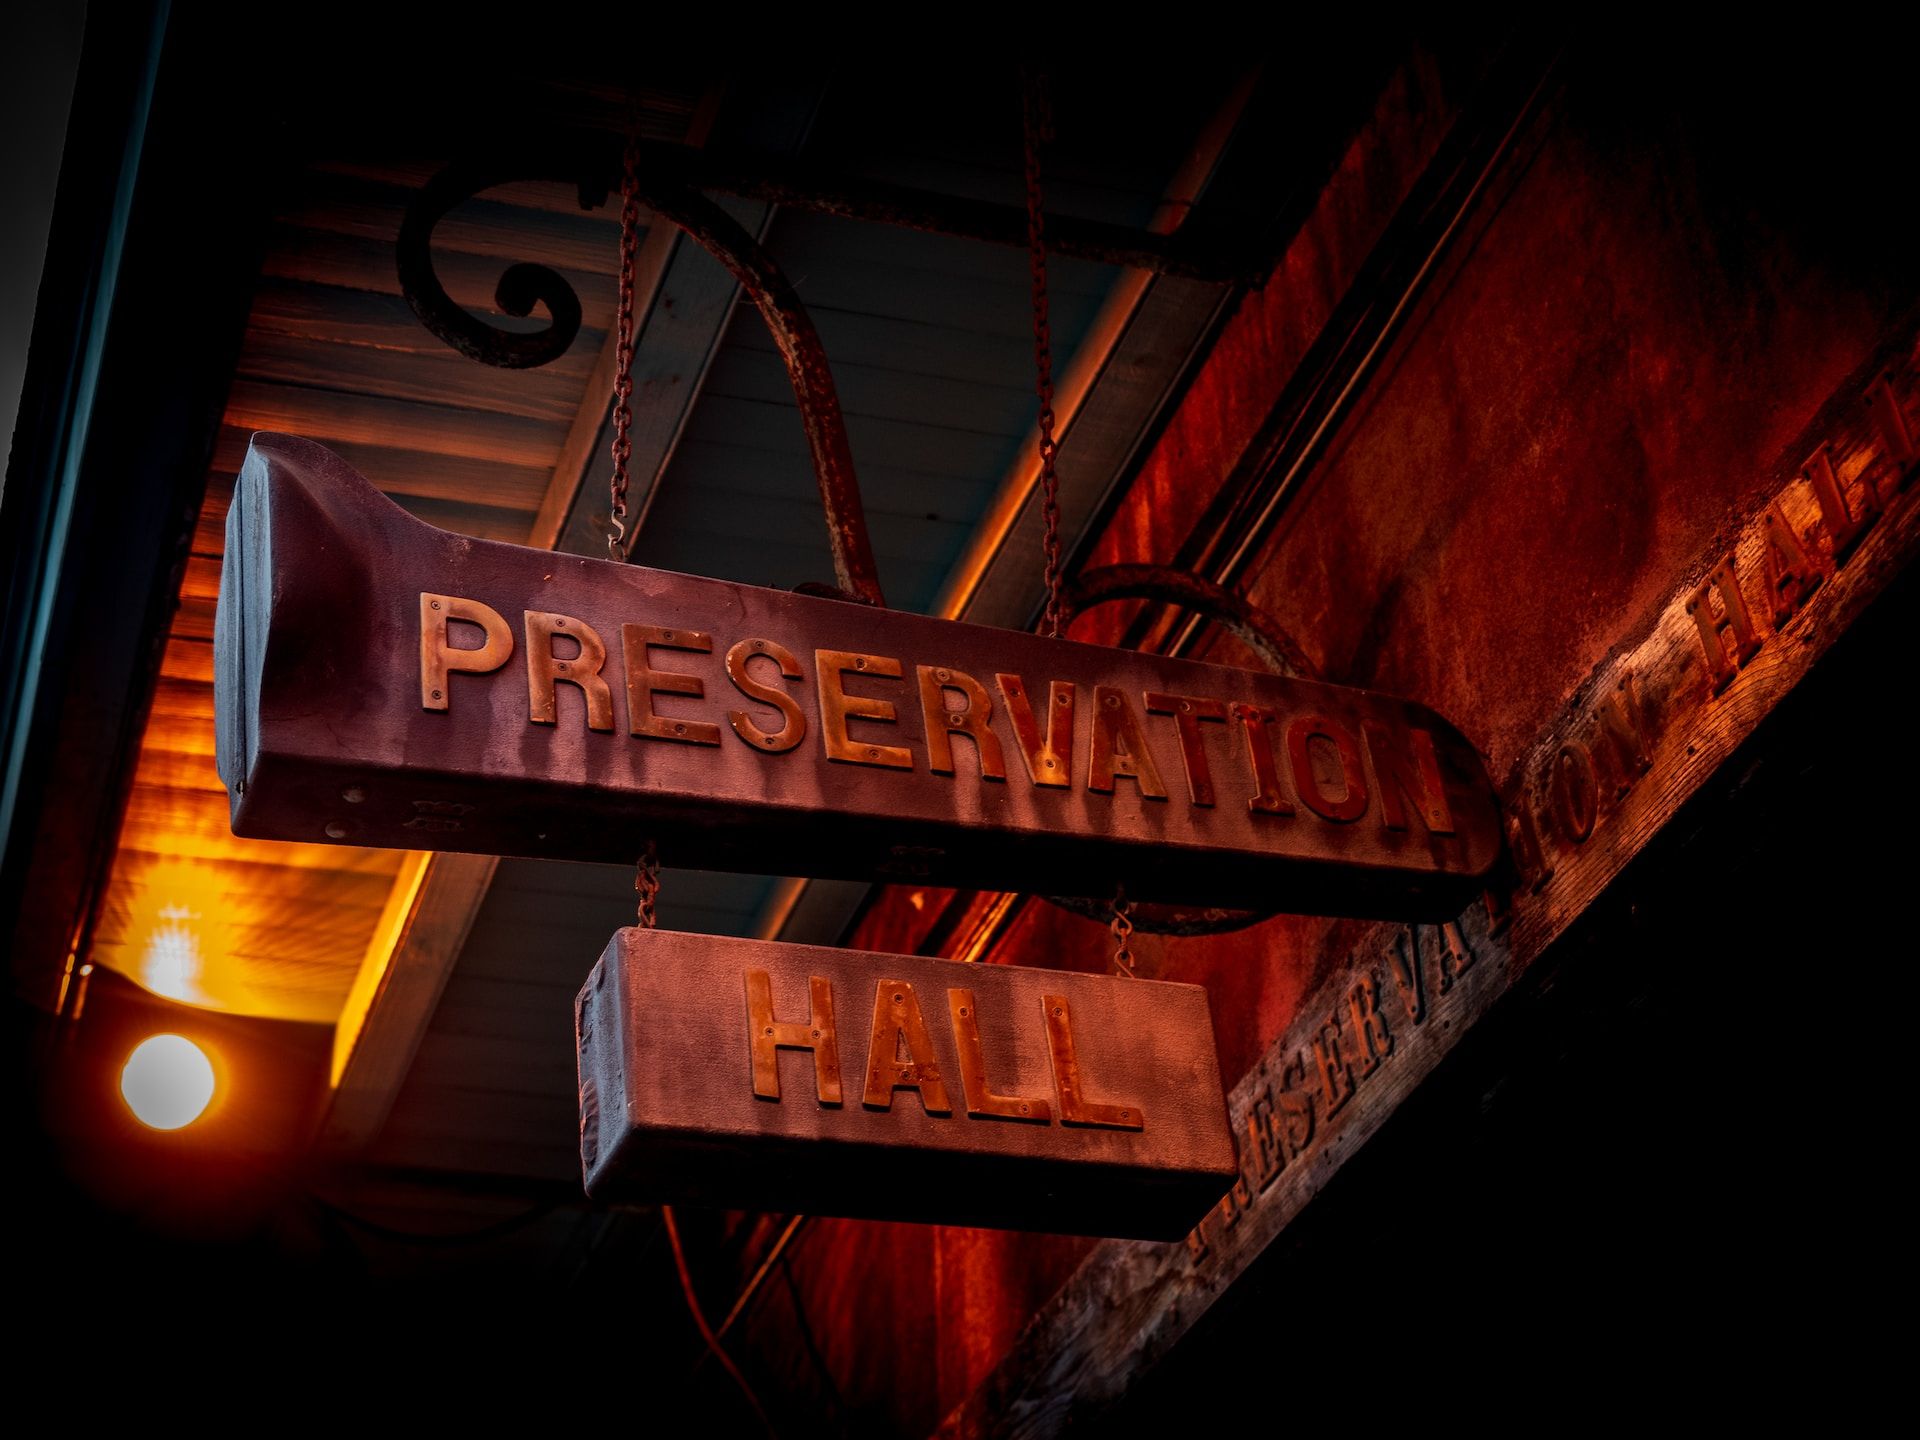 Preservation Hall, New Orleans